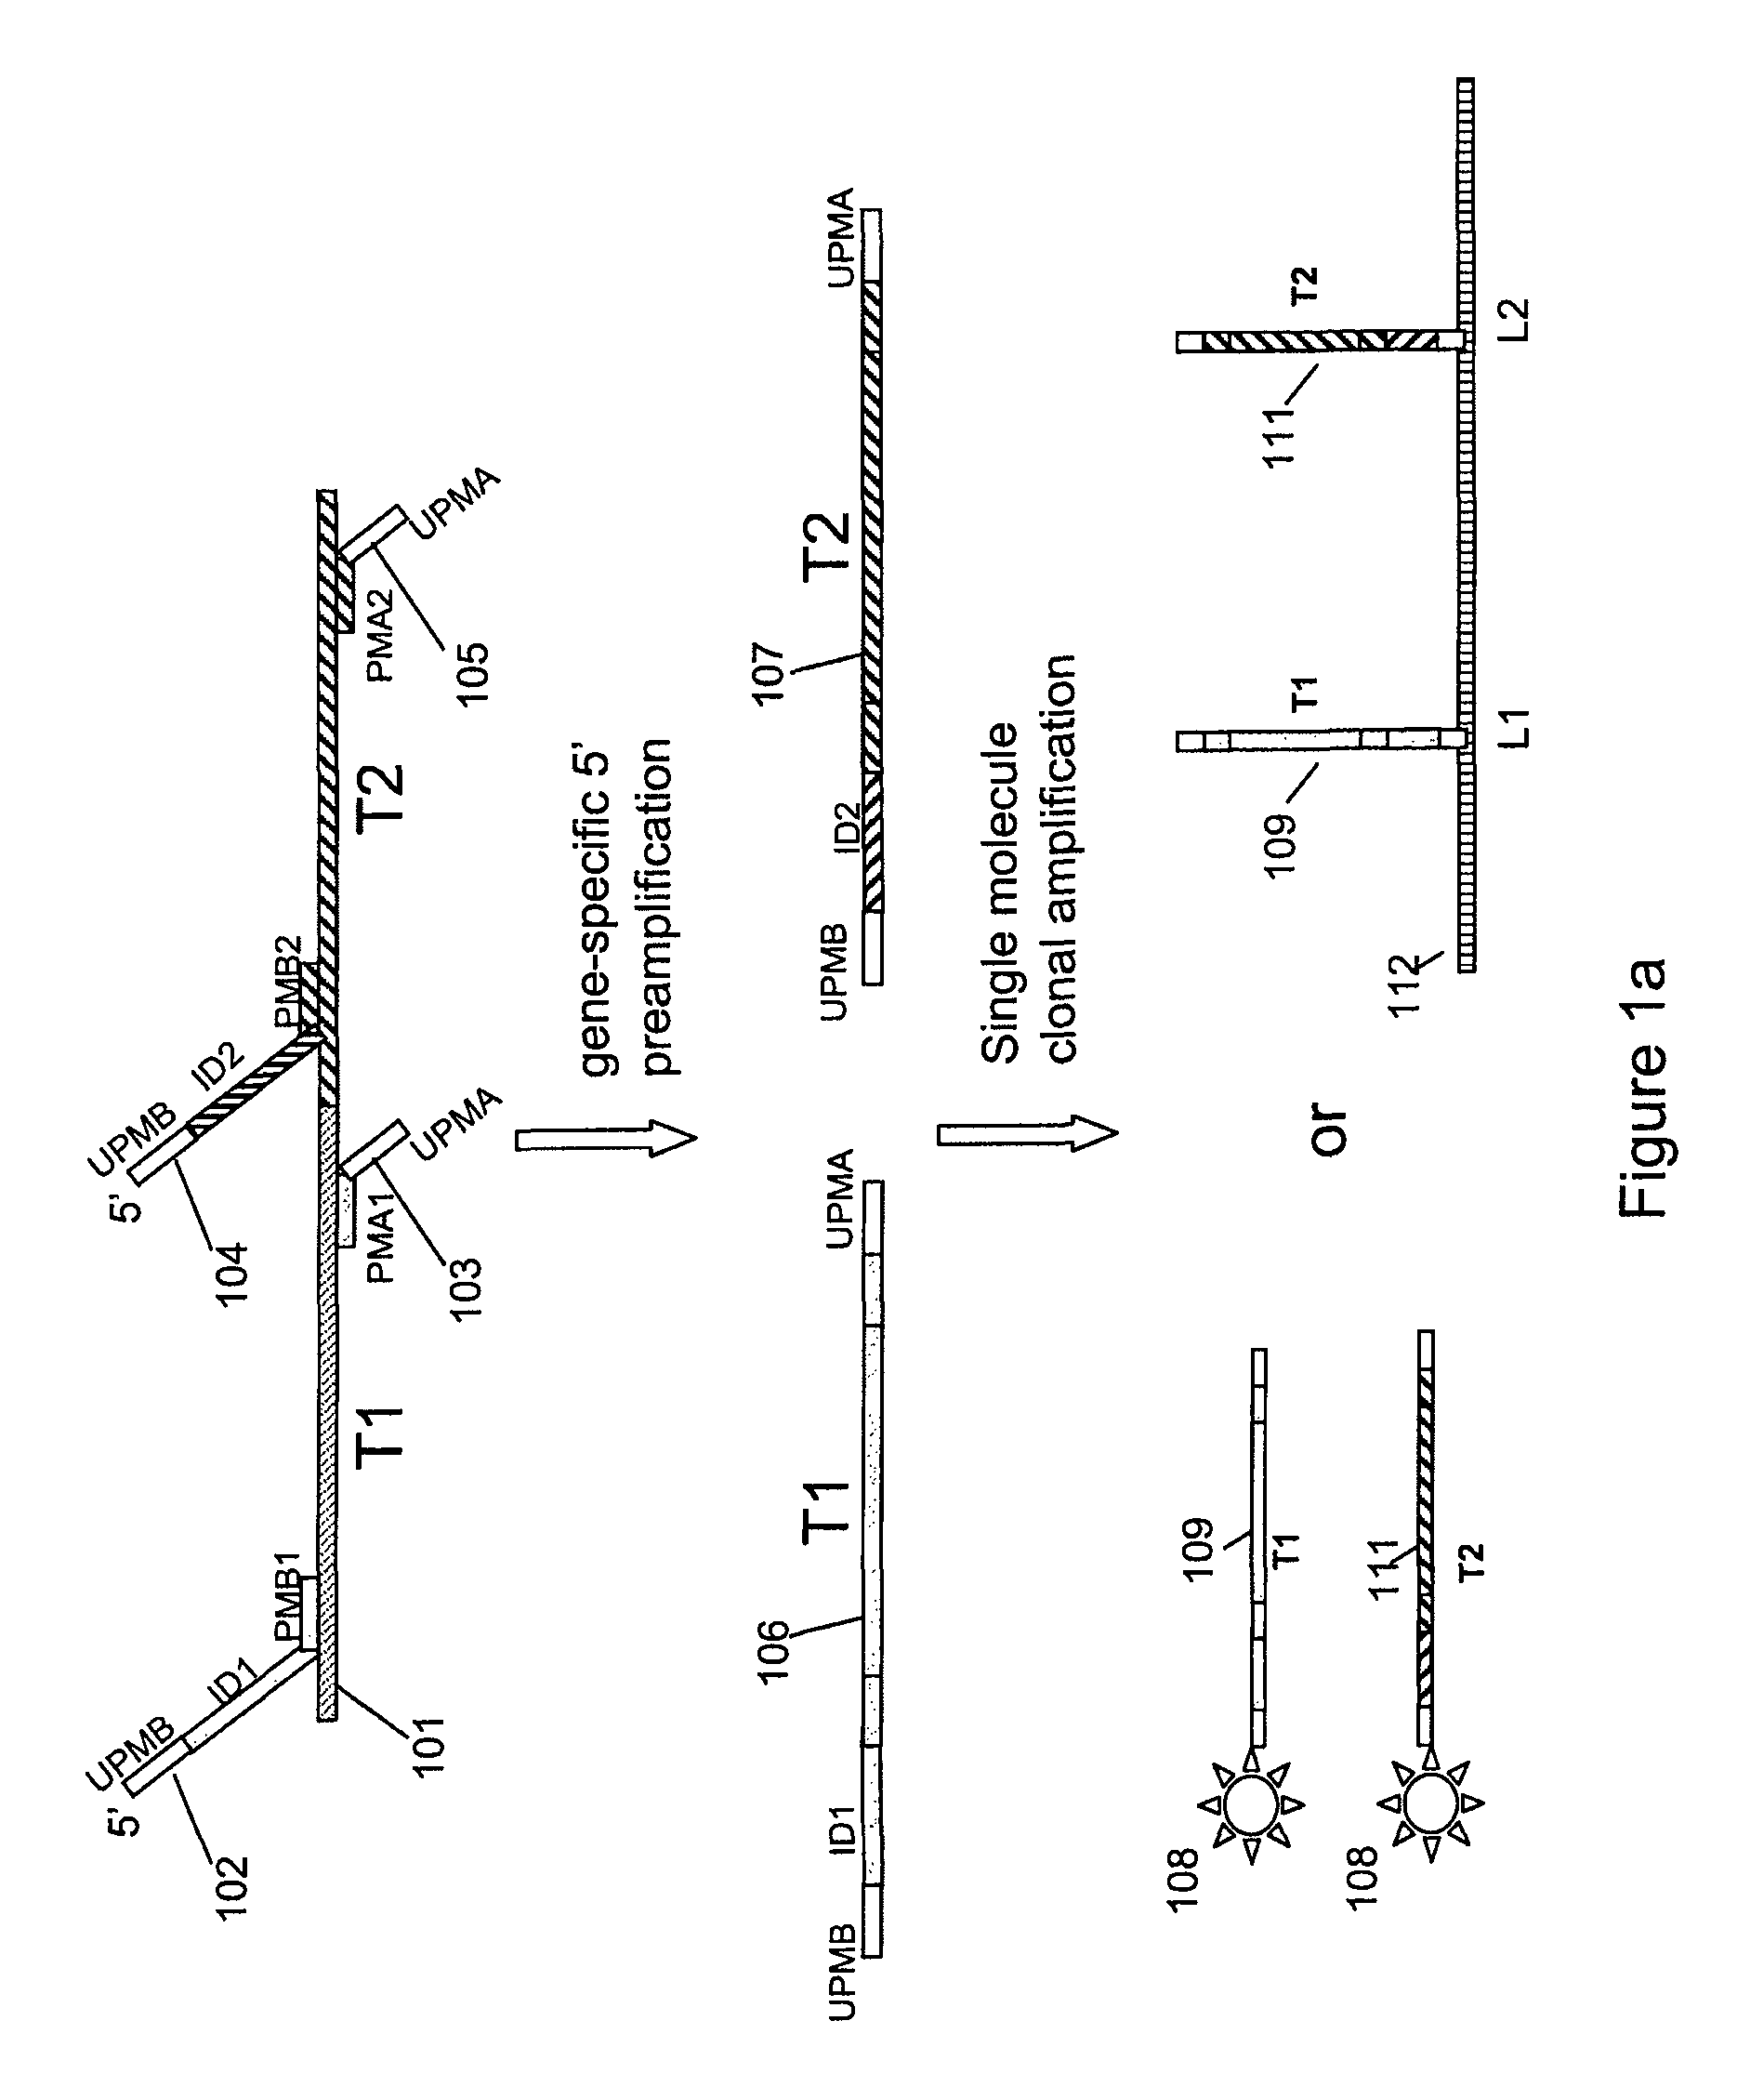 Multiplex nucleic acid detection methods and systems